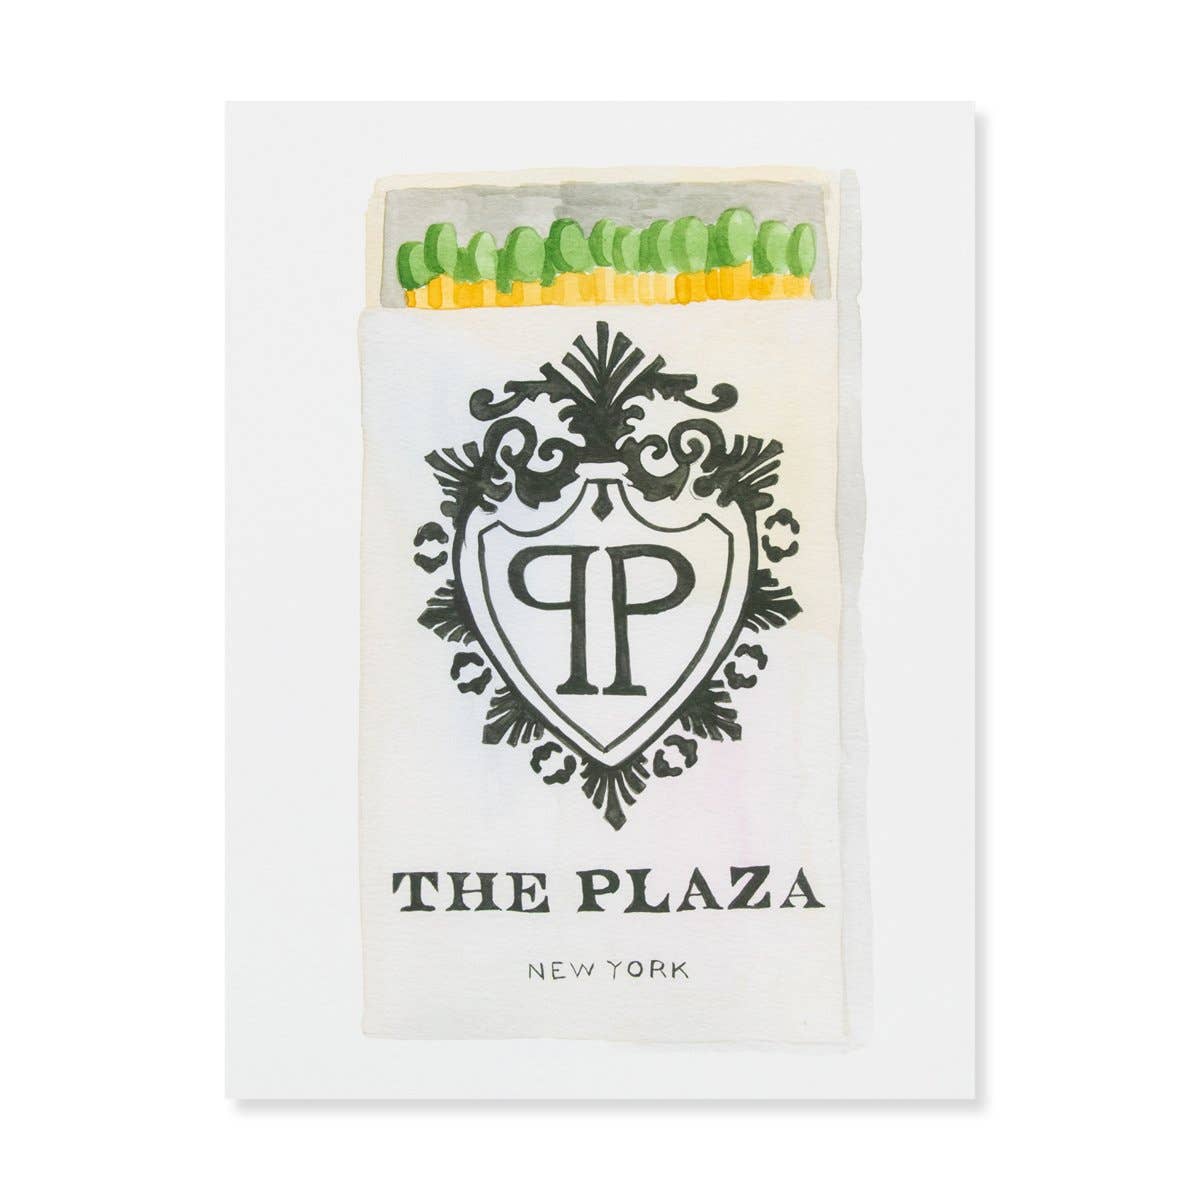 The Plaza NY Matchbook Watercolor Print